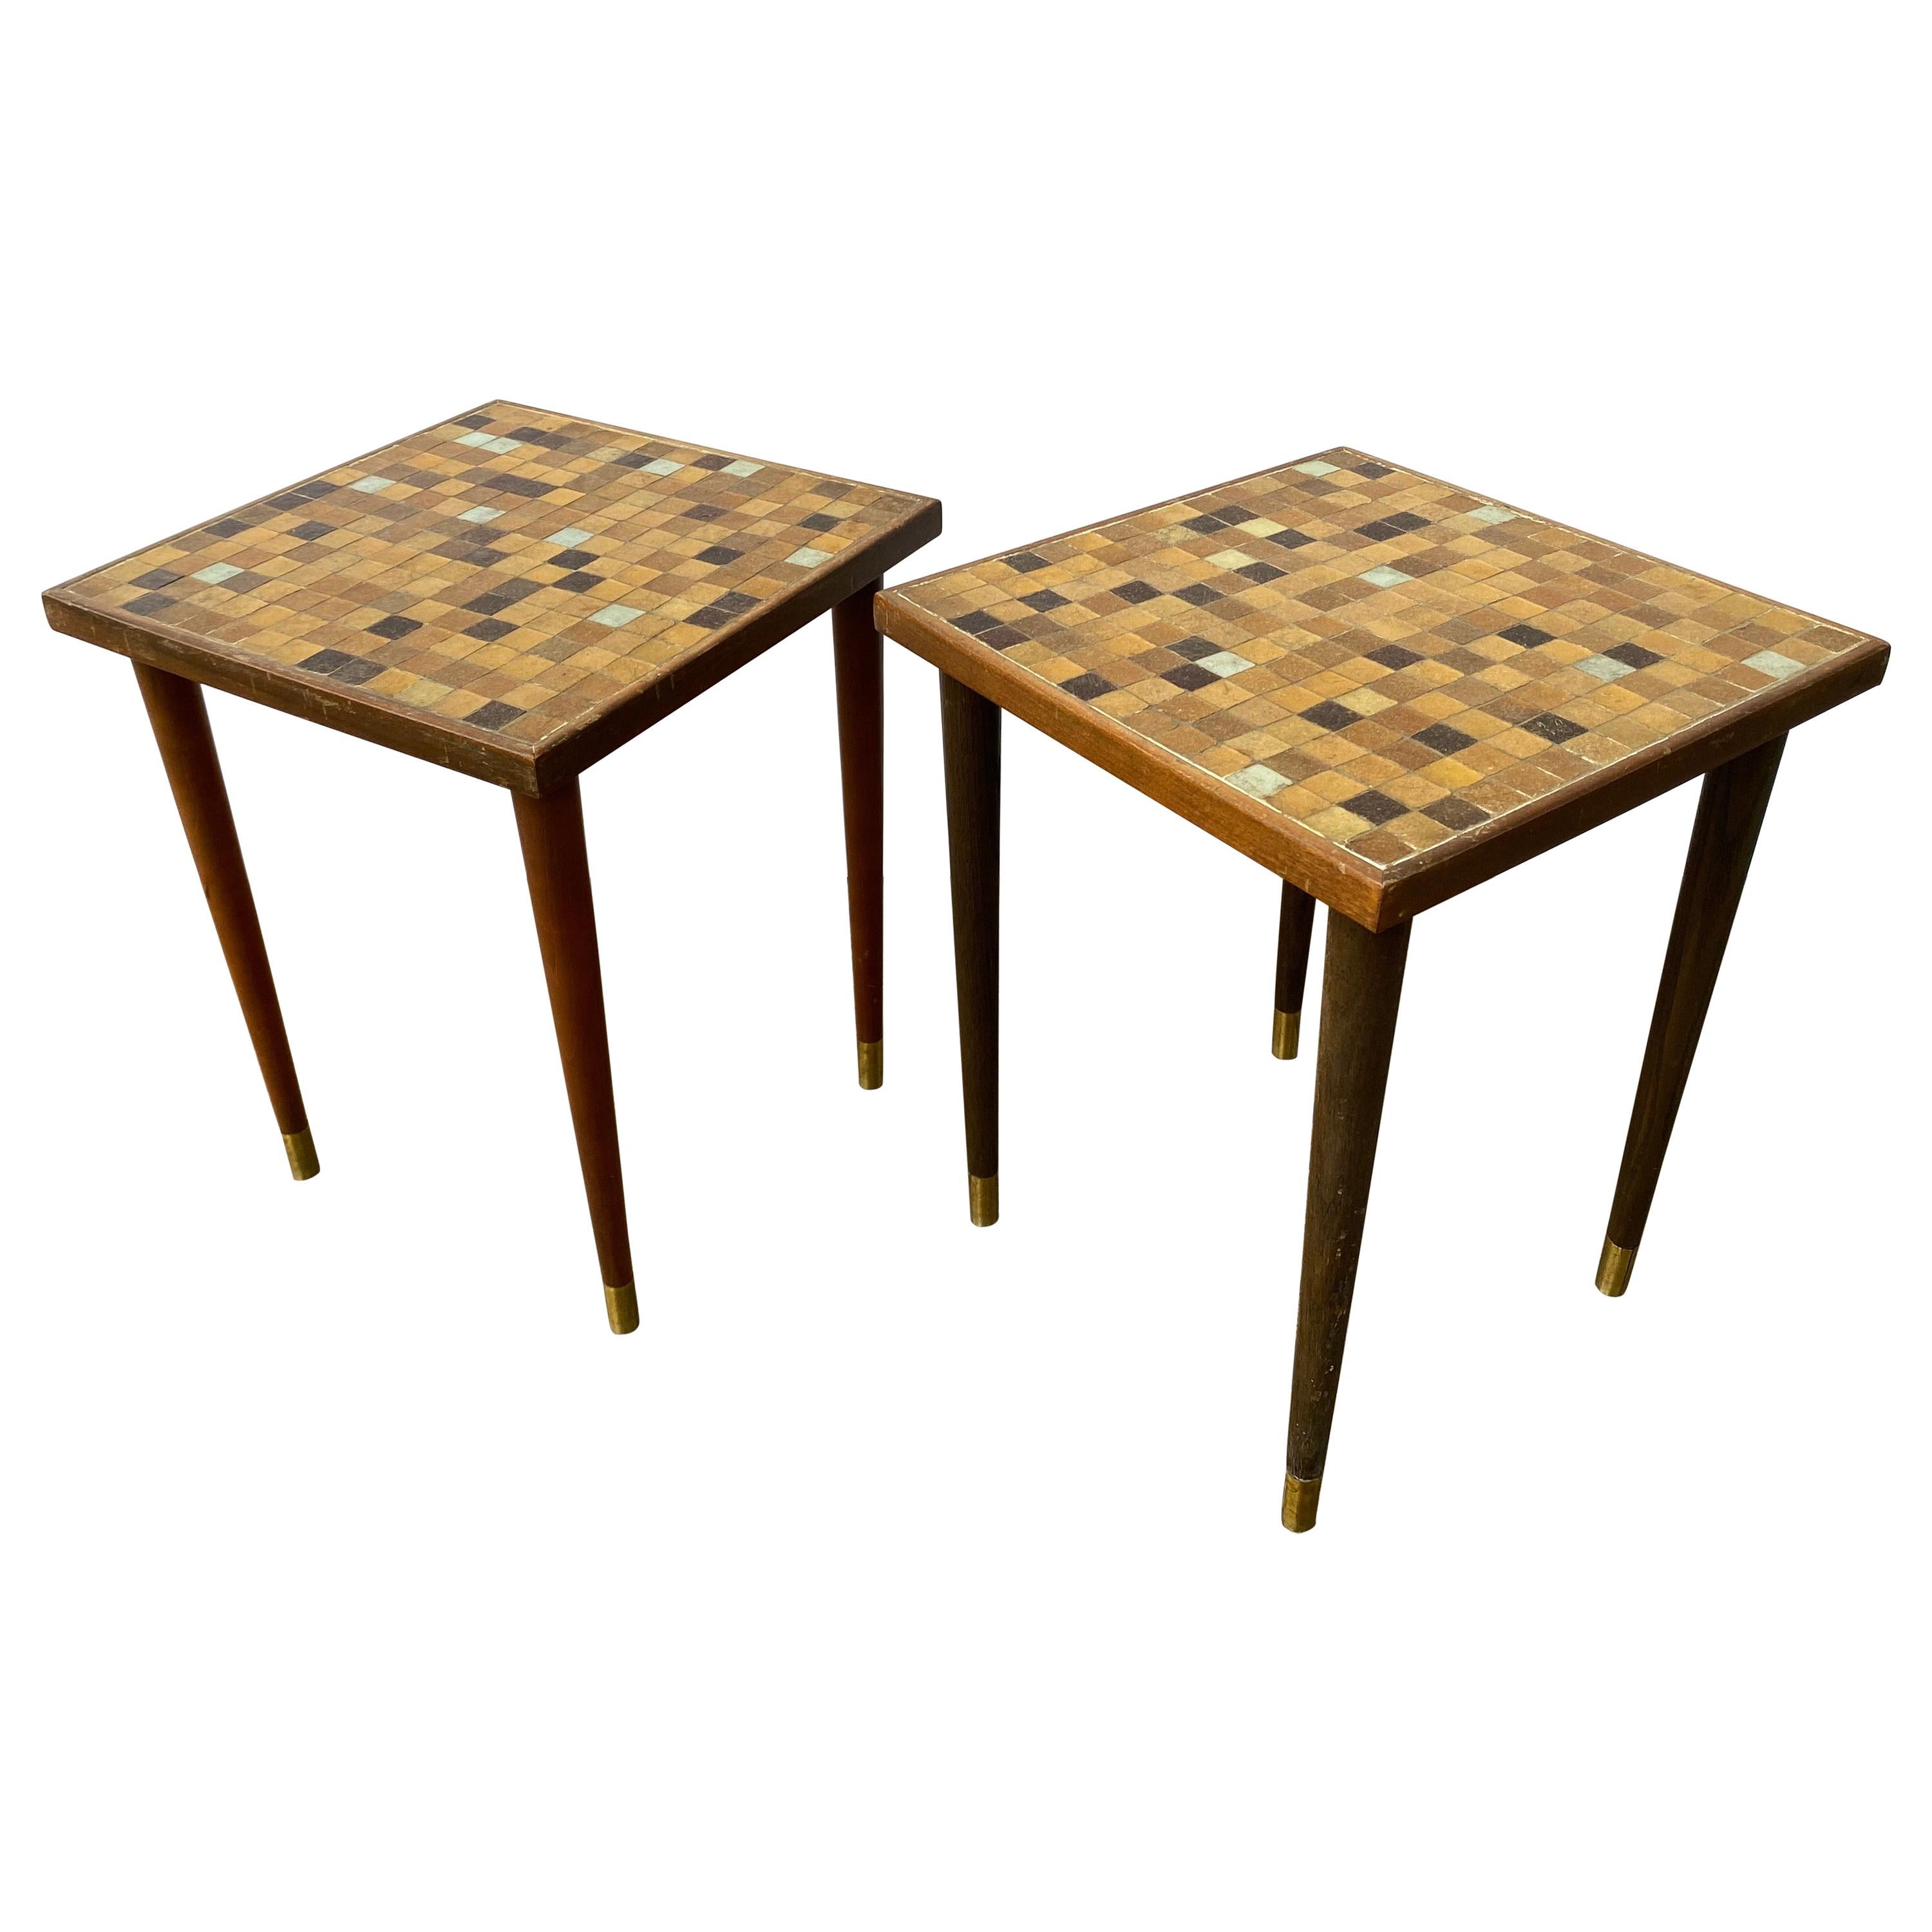 Pair of Small Murano Glass Topped Tile Tables